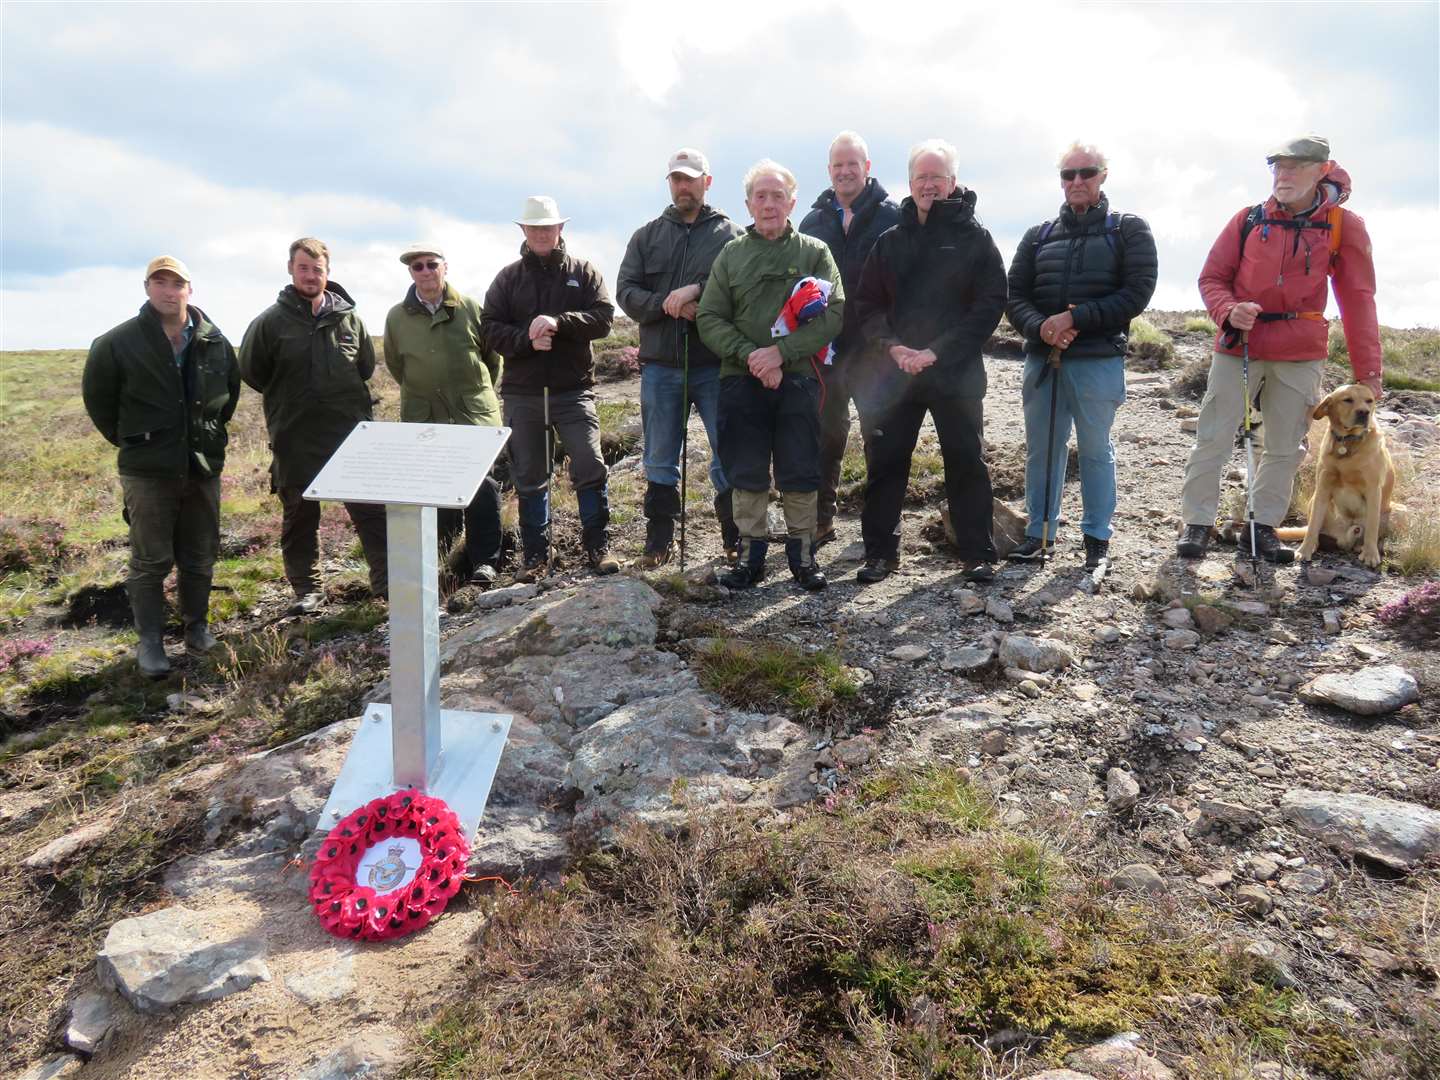 The group following the installation of the plaque at Creag Riabhach.